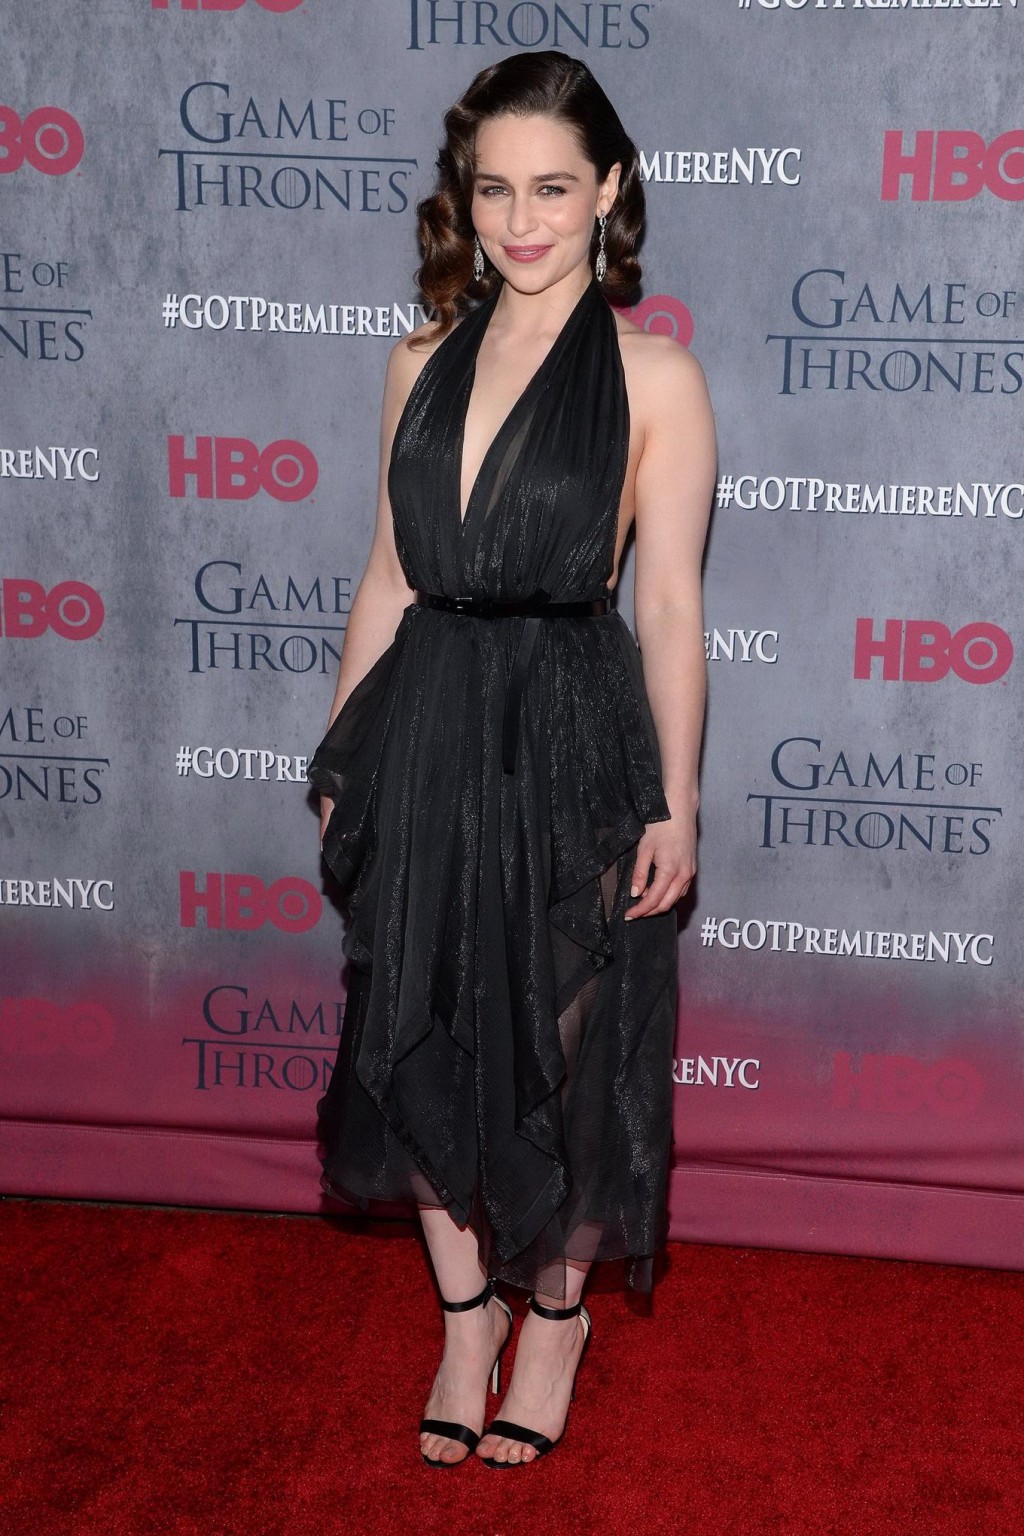 Emilia Clarke braless wearing black partially see-through dress at the Game of T #75201484